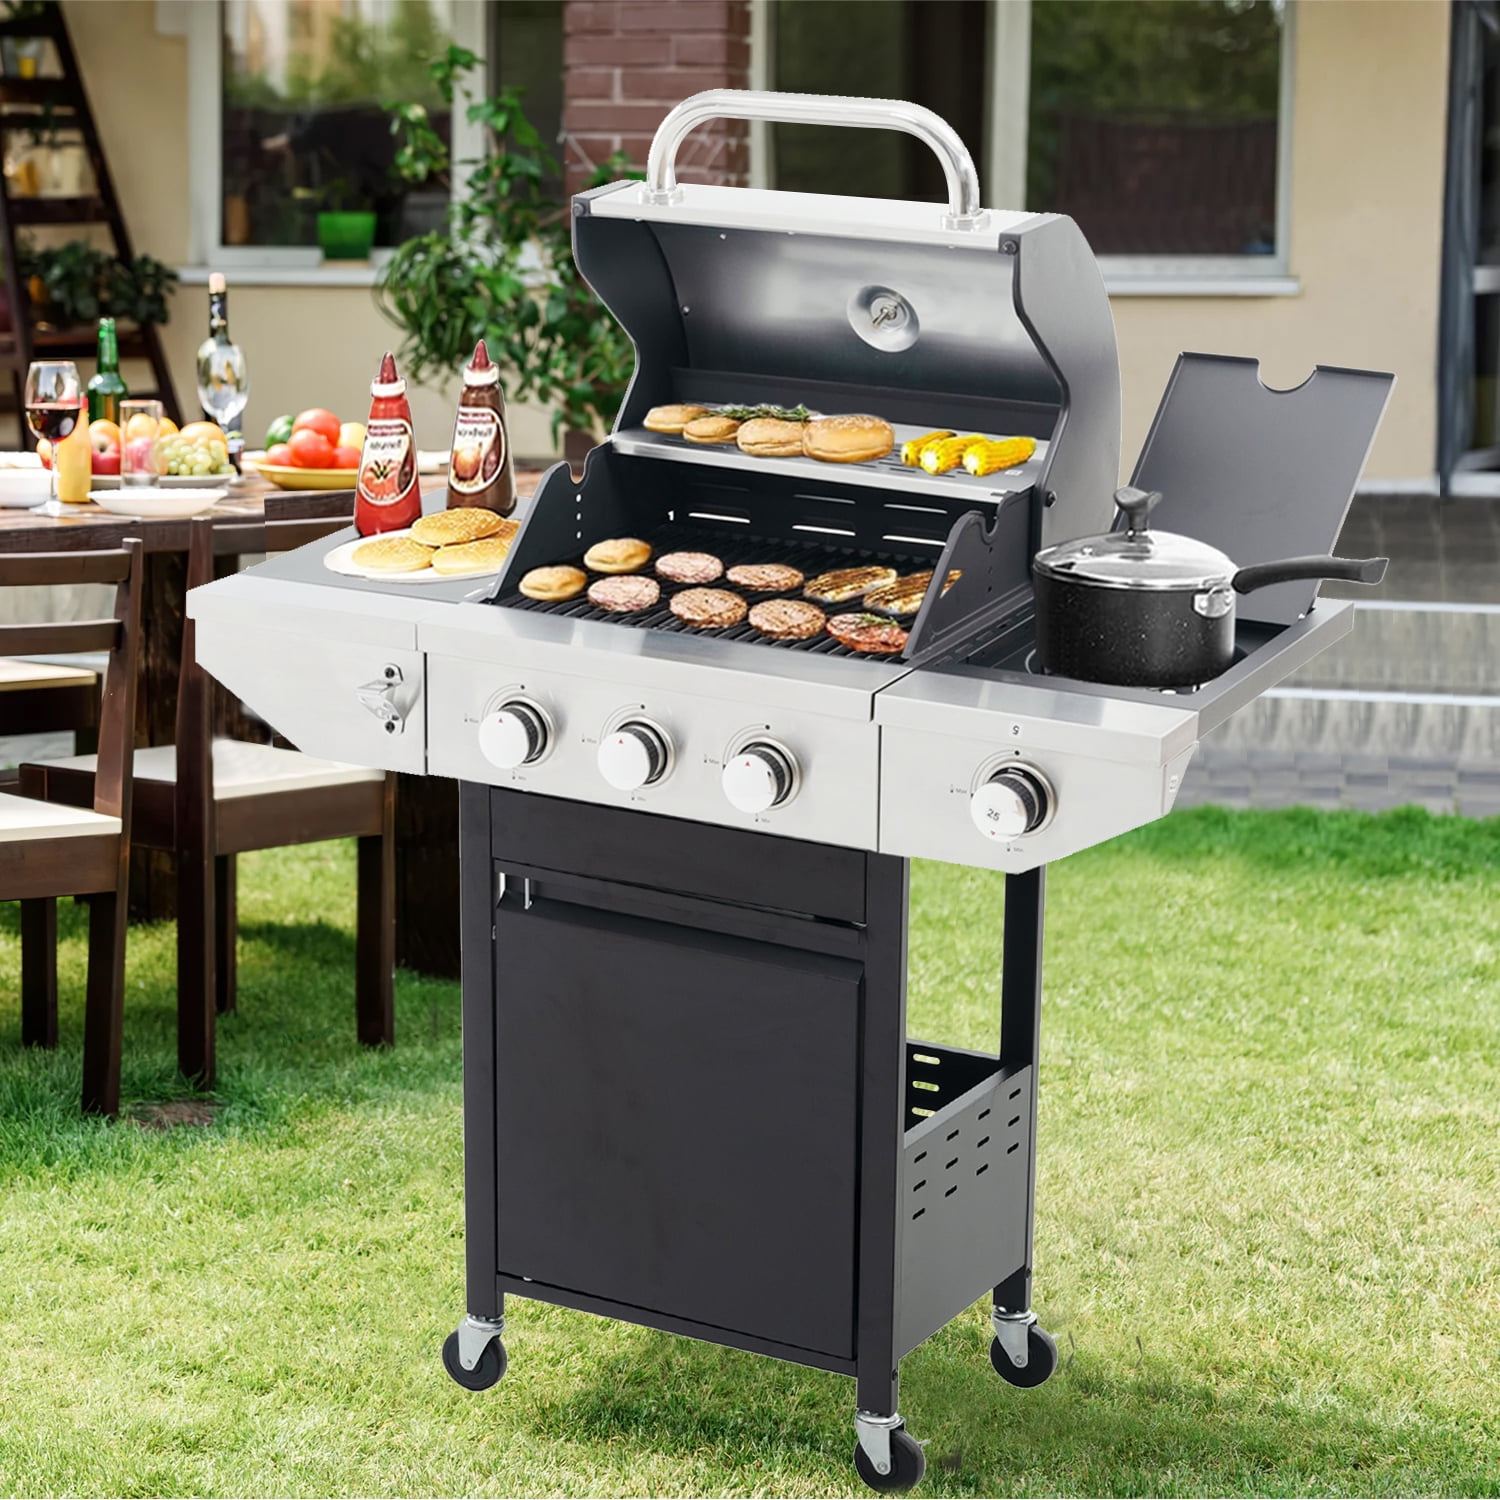 HighSound 3 Burner Propane Gas Grill, 37150 BTUs Stainless Steel Patio  Garden Barbecue Grill with 2 Foldable Side Burner & Thermometer, Perfect  for